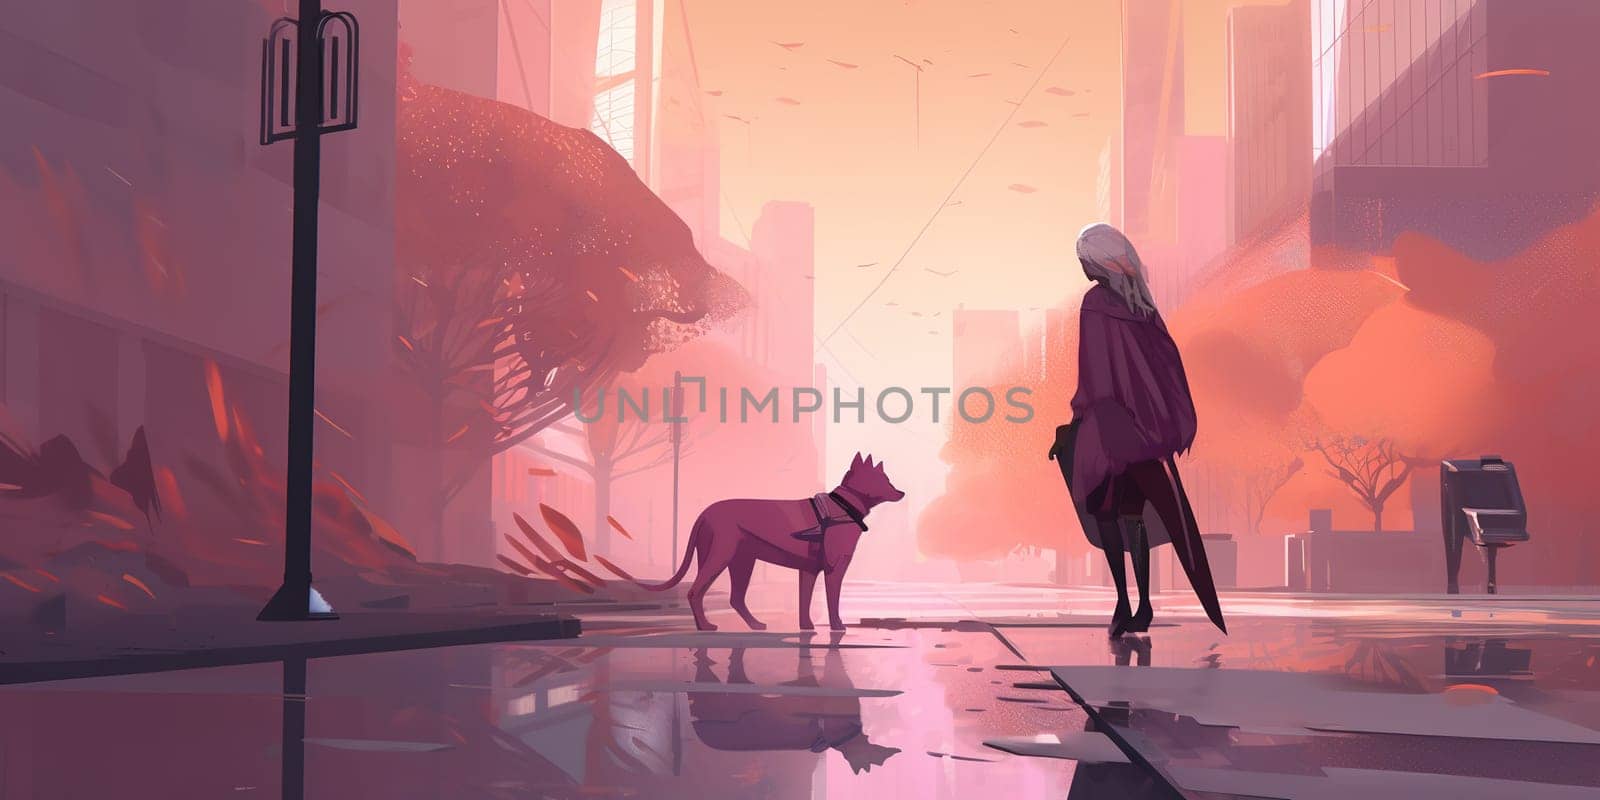 Illustration Girl Walking On A Street With Dog After The Rain In Pink Colors by tan4ikk1